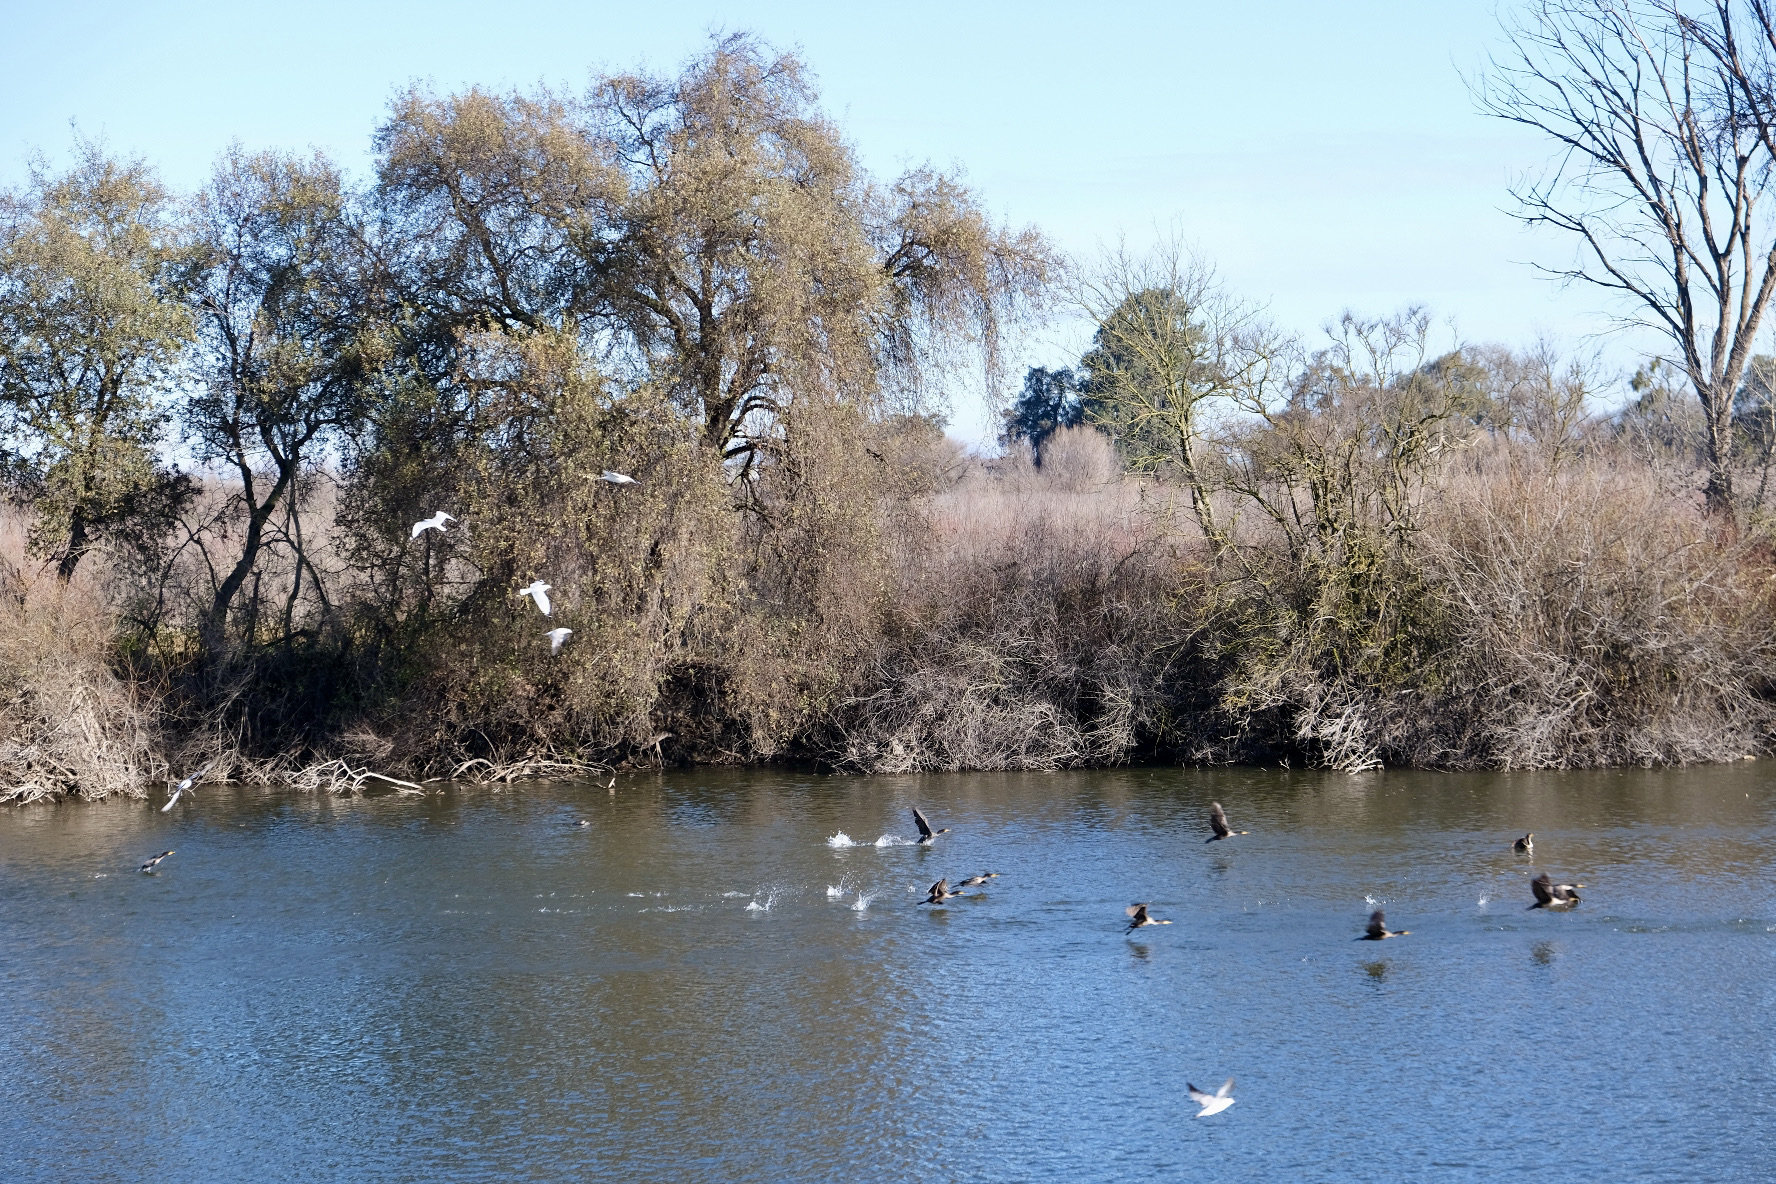 A view of a lake with birds.